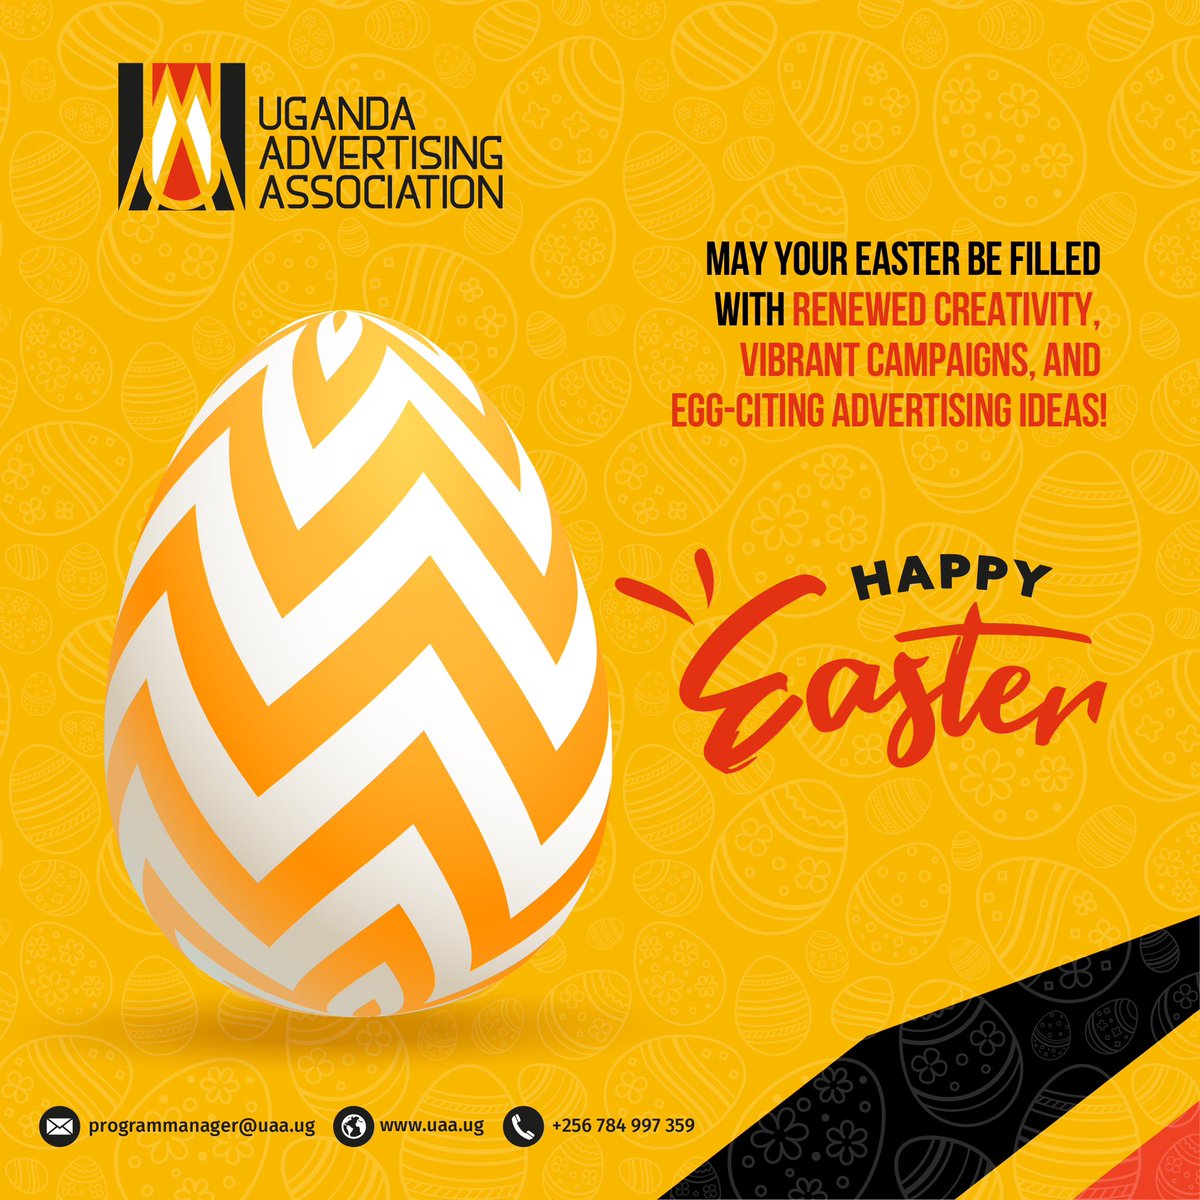 Wishing all our fellow advertisers a season of inspiration and success.🐰🎨🥚 HAPPY EASTER